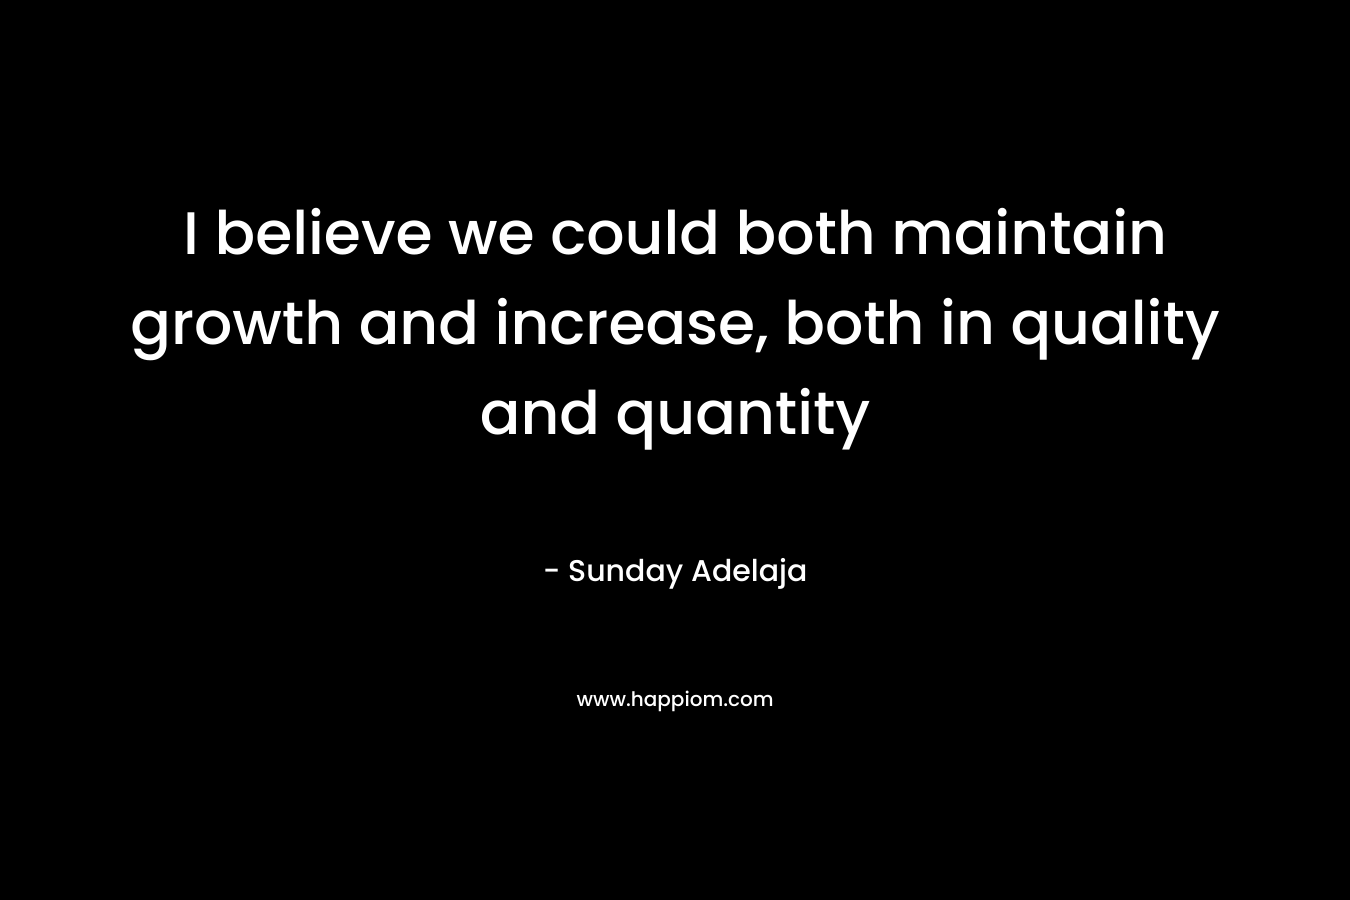 I believe we could both maintain growth and increase, both in quality and quantity